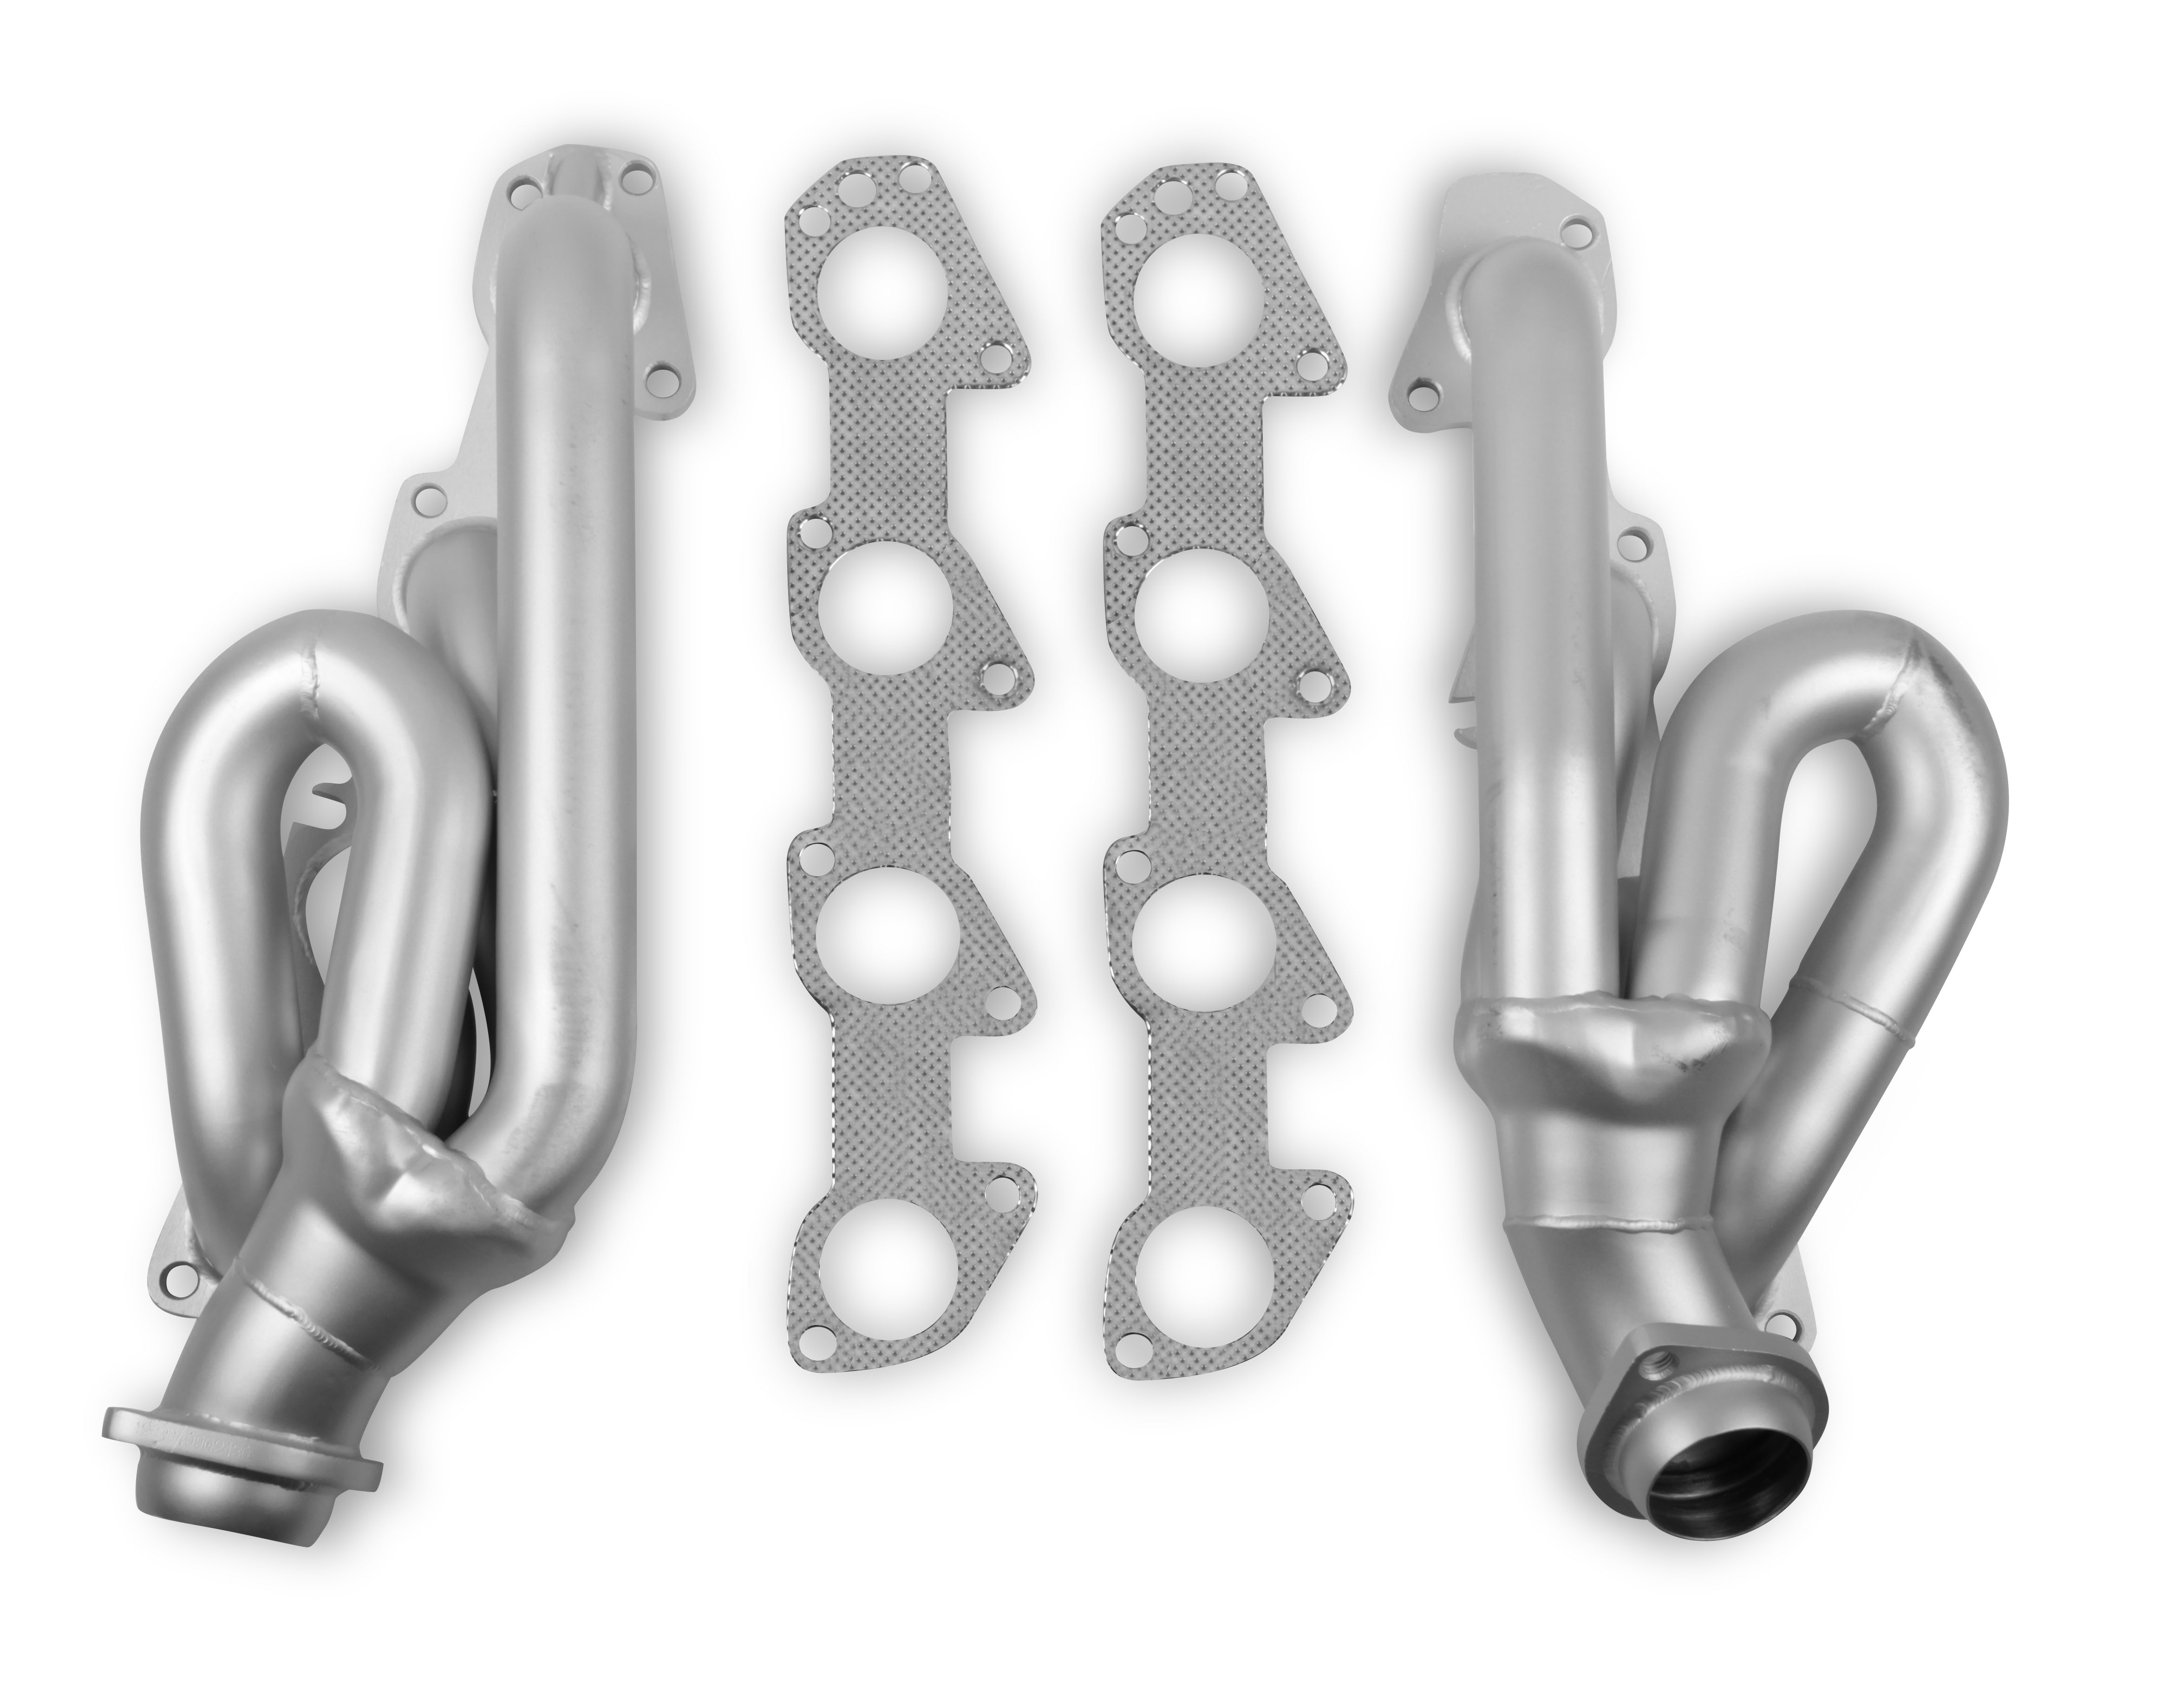 Flowtech Shorty Headers for 2009-13 Dodge/Ram 1500 with 5.7L Hemi